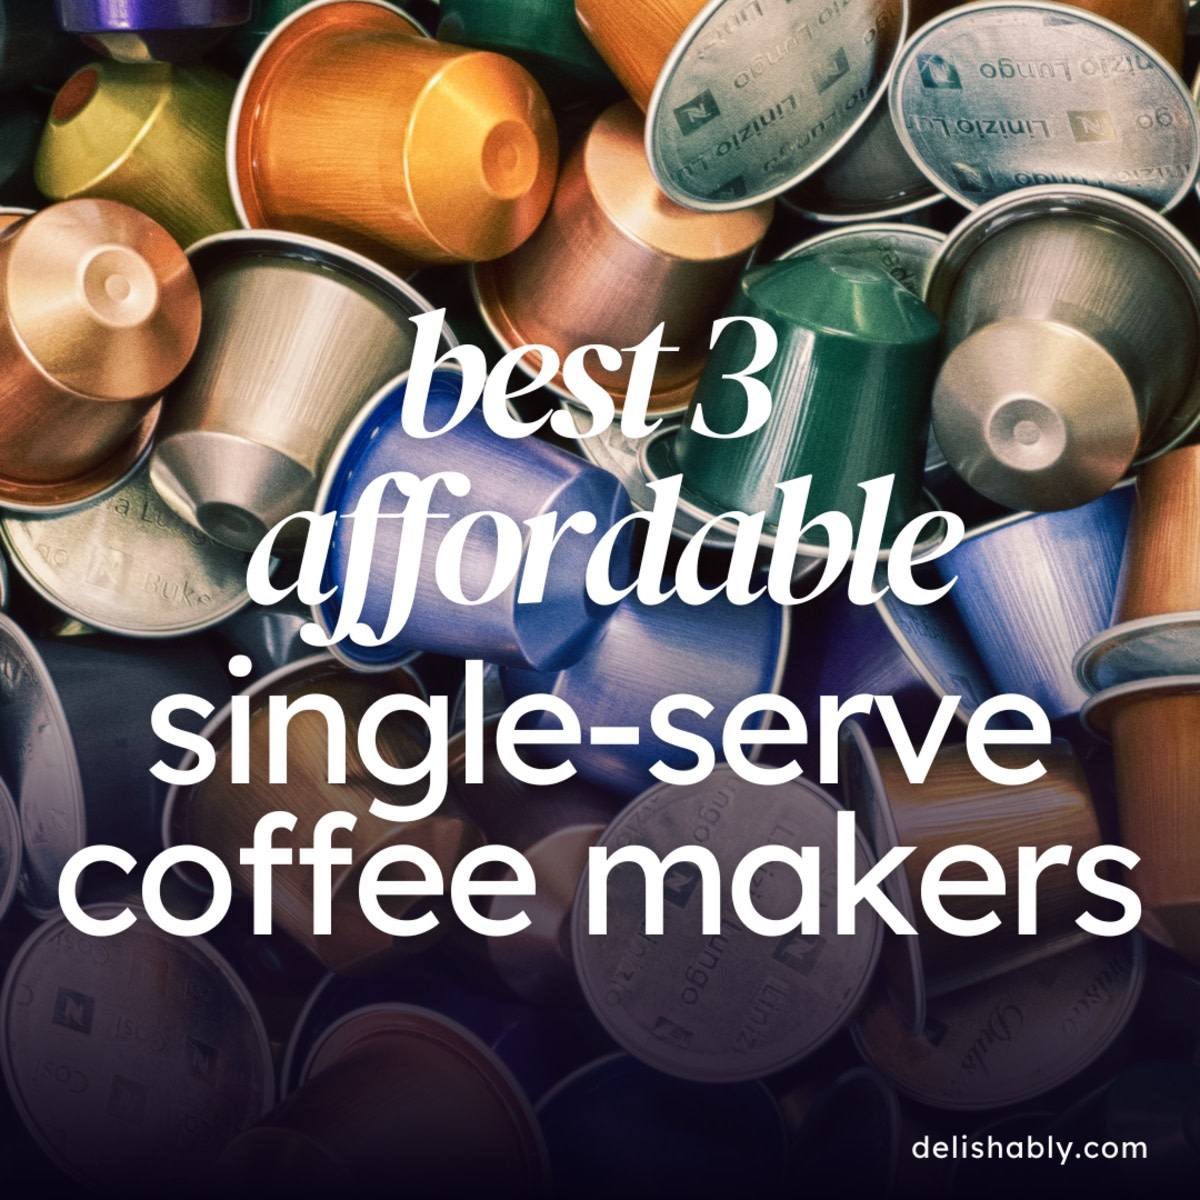 Find out about the three best budget-friendly, single-serve, coffee makers.